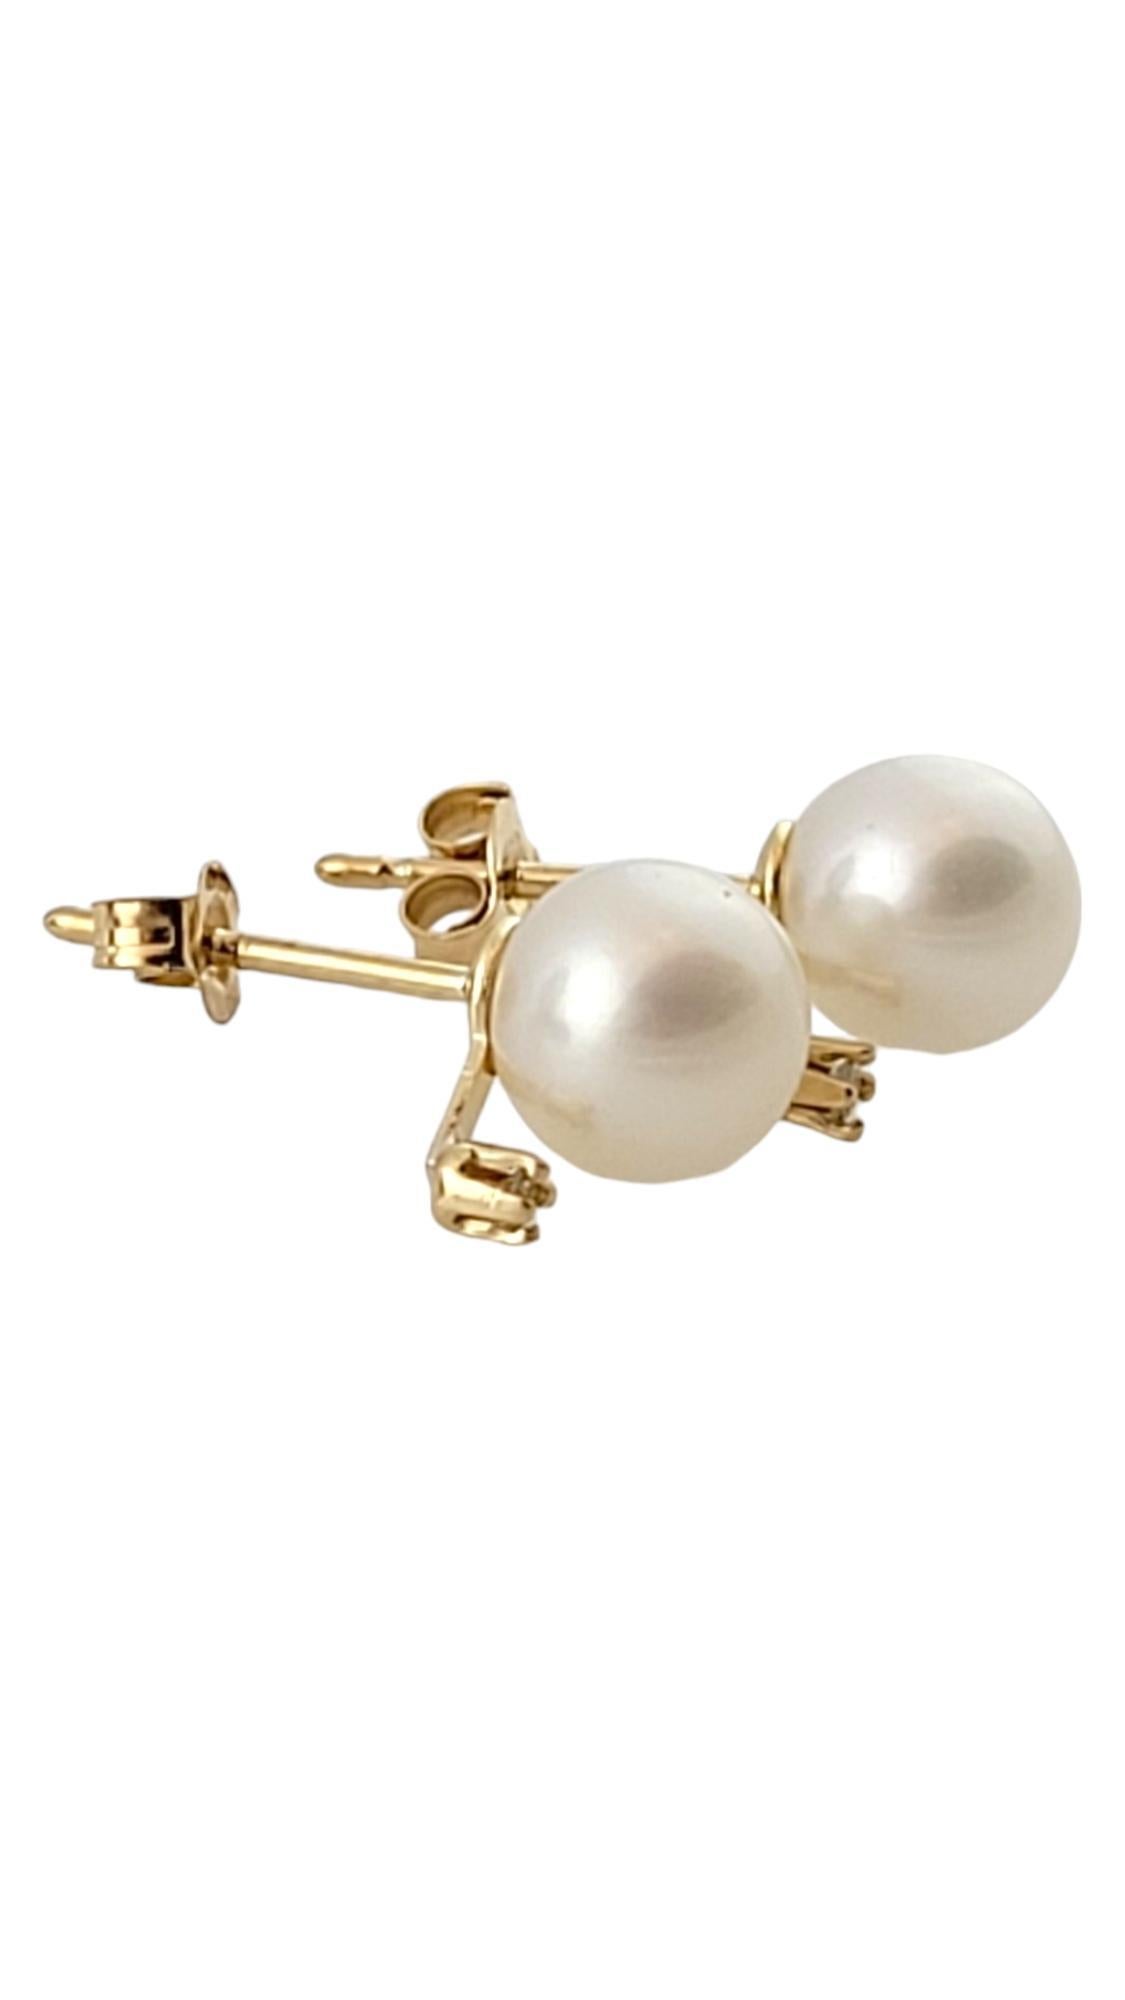 Vintage 14K Yellow Gold Pearl & Diamond Earrings

This gorgeous set of earrings feature 2 beautiful white pearls paired with 2 sparkling diamonds (one single cut, one round brilliant cut)!

Pearls: 6.22mm each

Approximate total diamond weight: .02